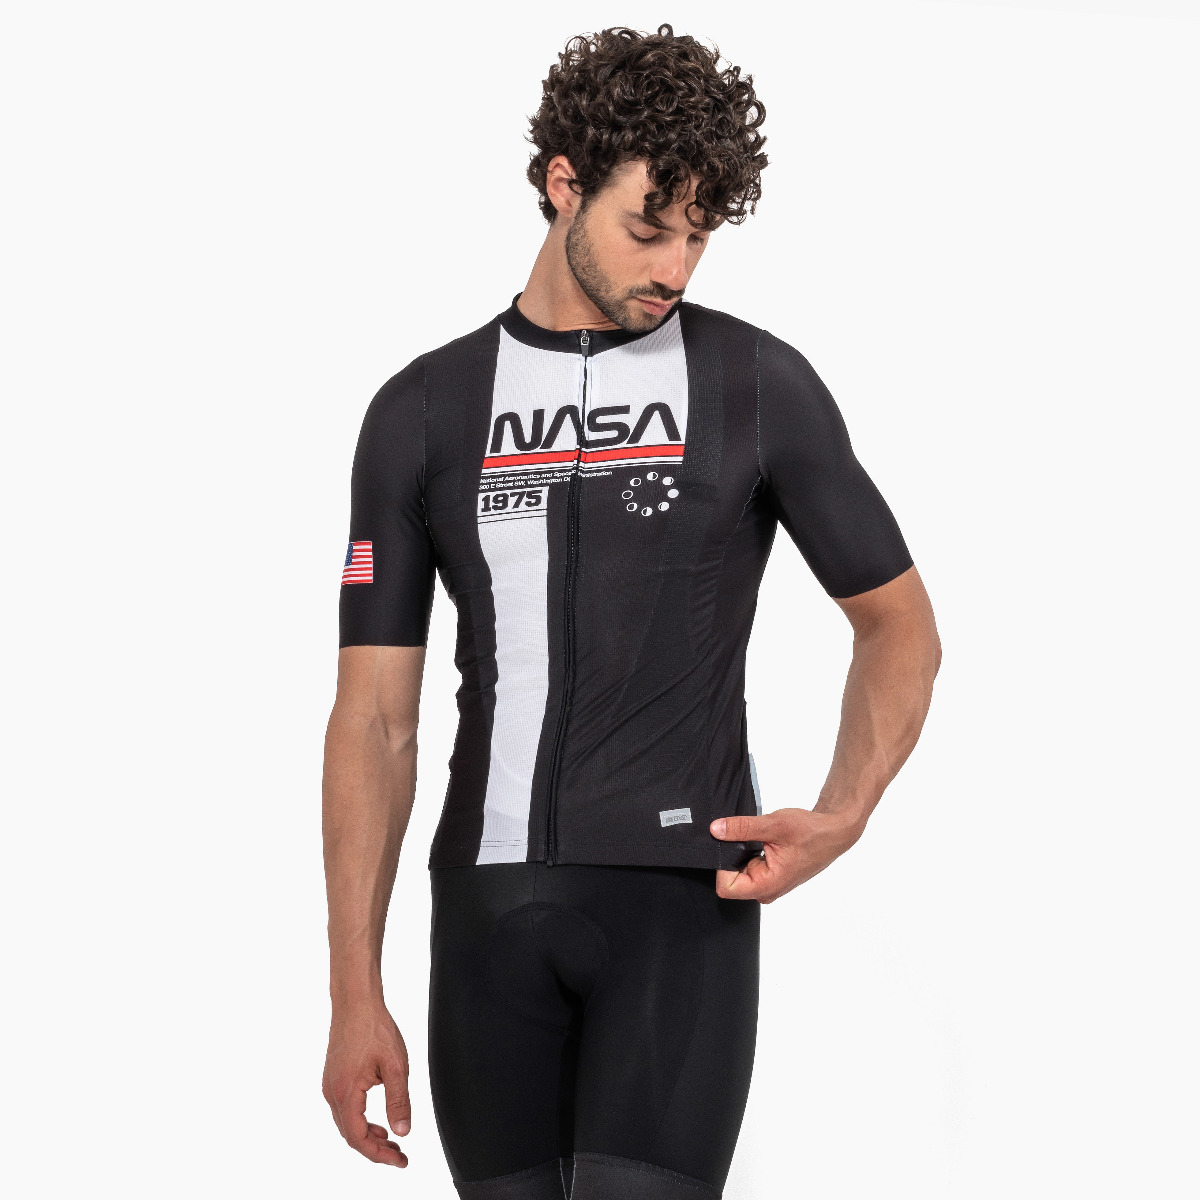 MAILLOT DE CICLISMO X-OVER - SPACE AGENCY 09